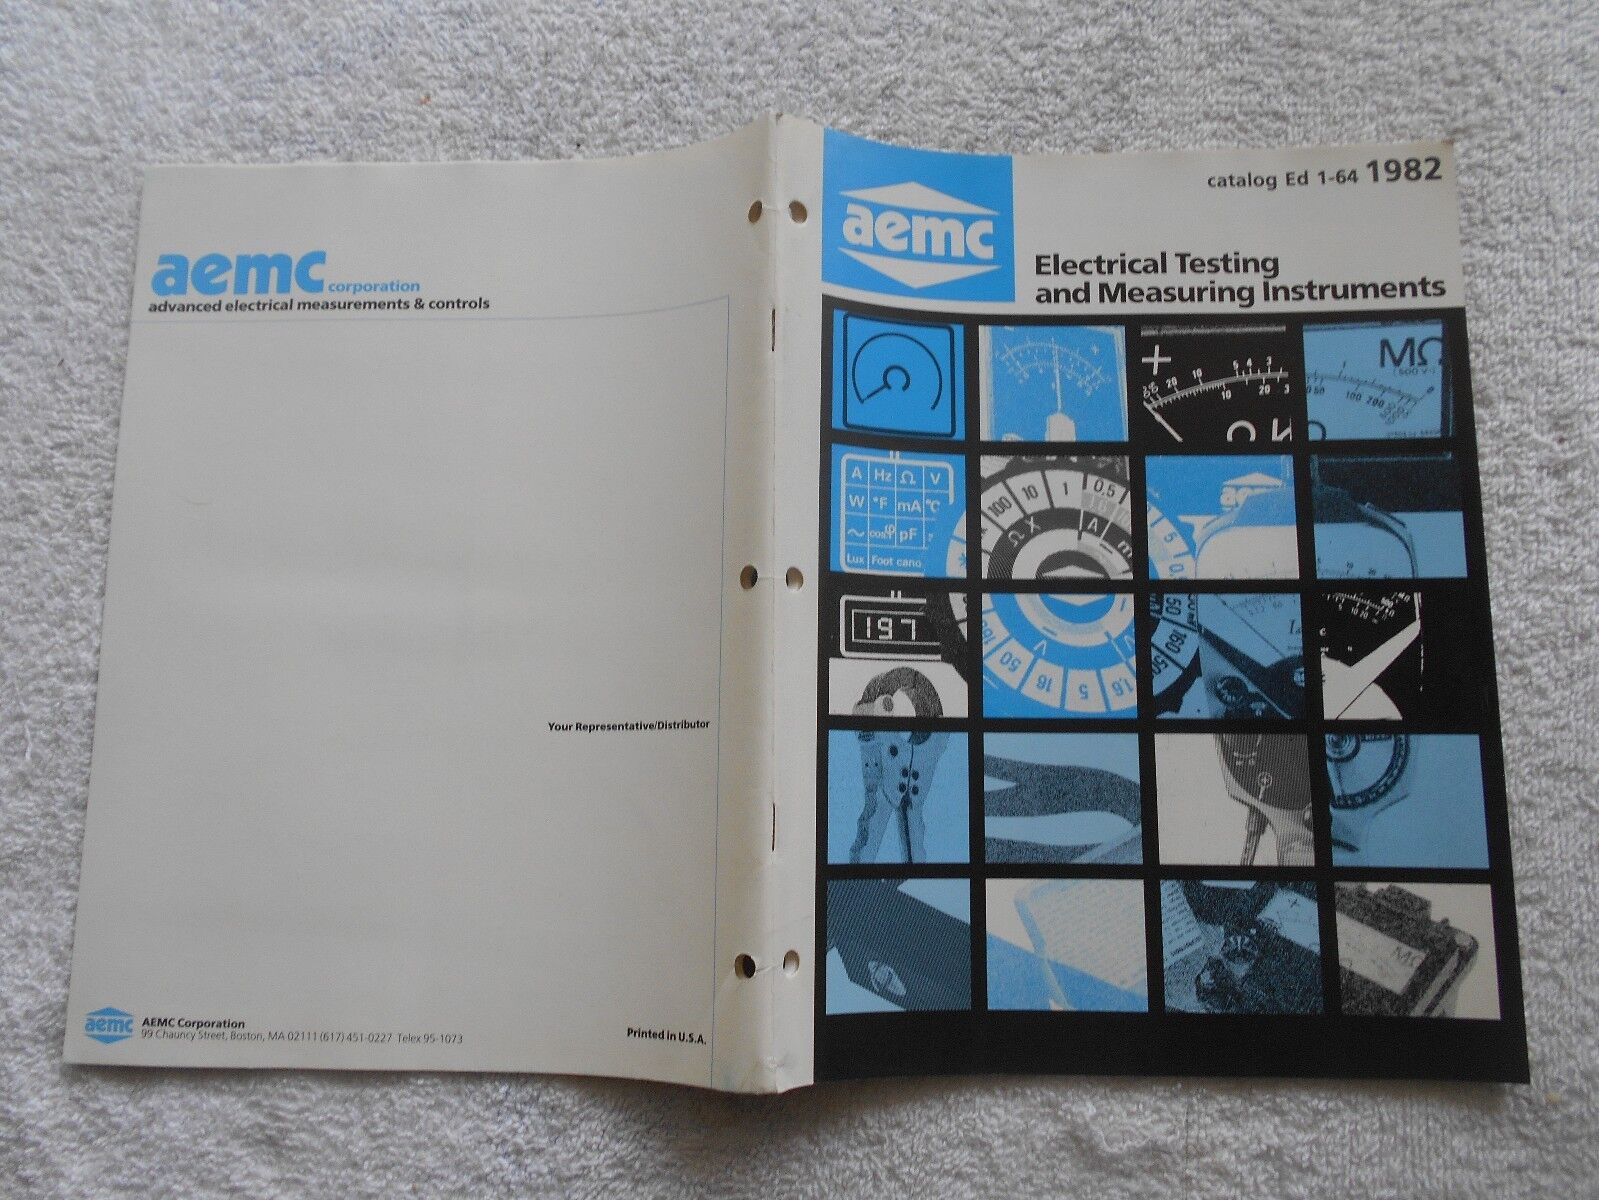 1982 AEMC ELECTRICAL TESTING AND MEASURING INSTRUMENTS CATALOG-64 PAGES